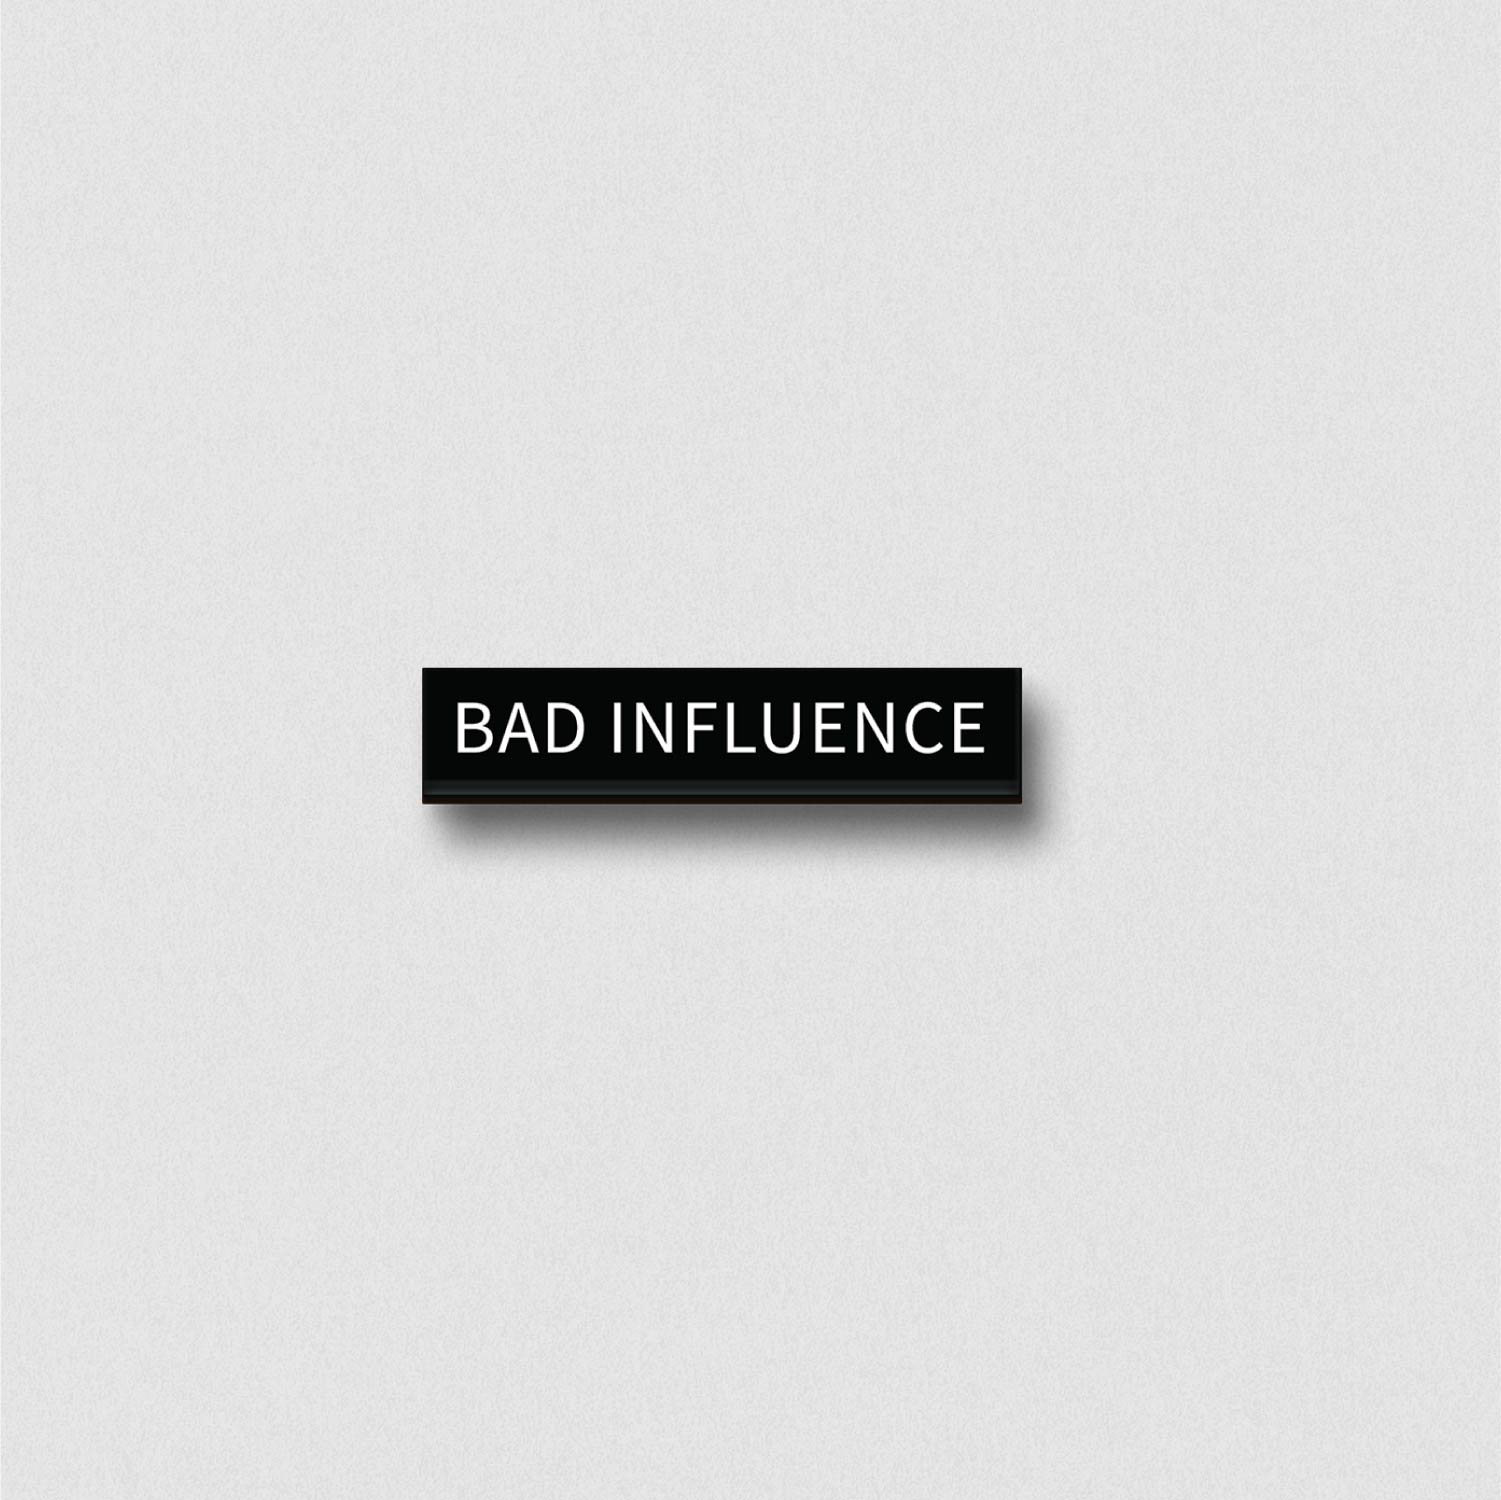 Pin on Influence